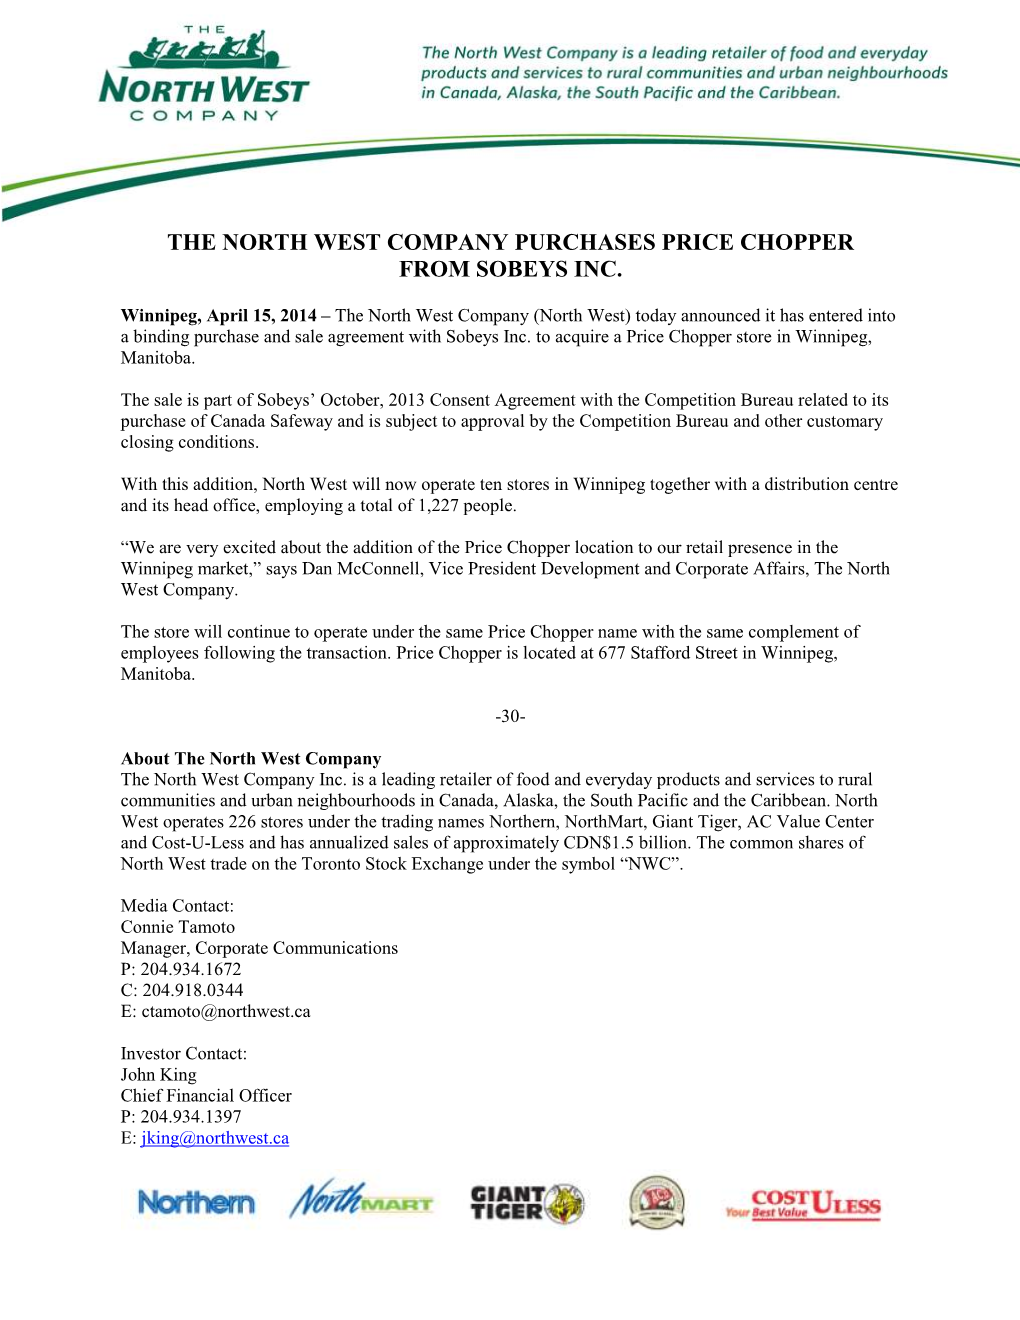 The North West Company Purchases Price Chopper from Sobeys Inc